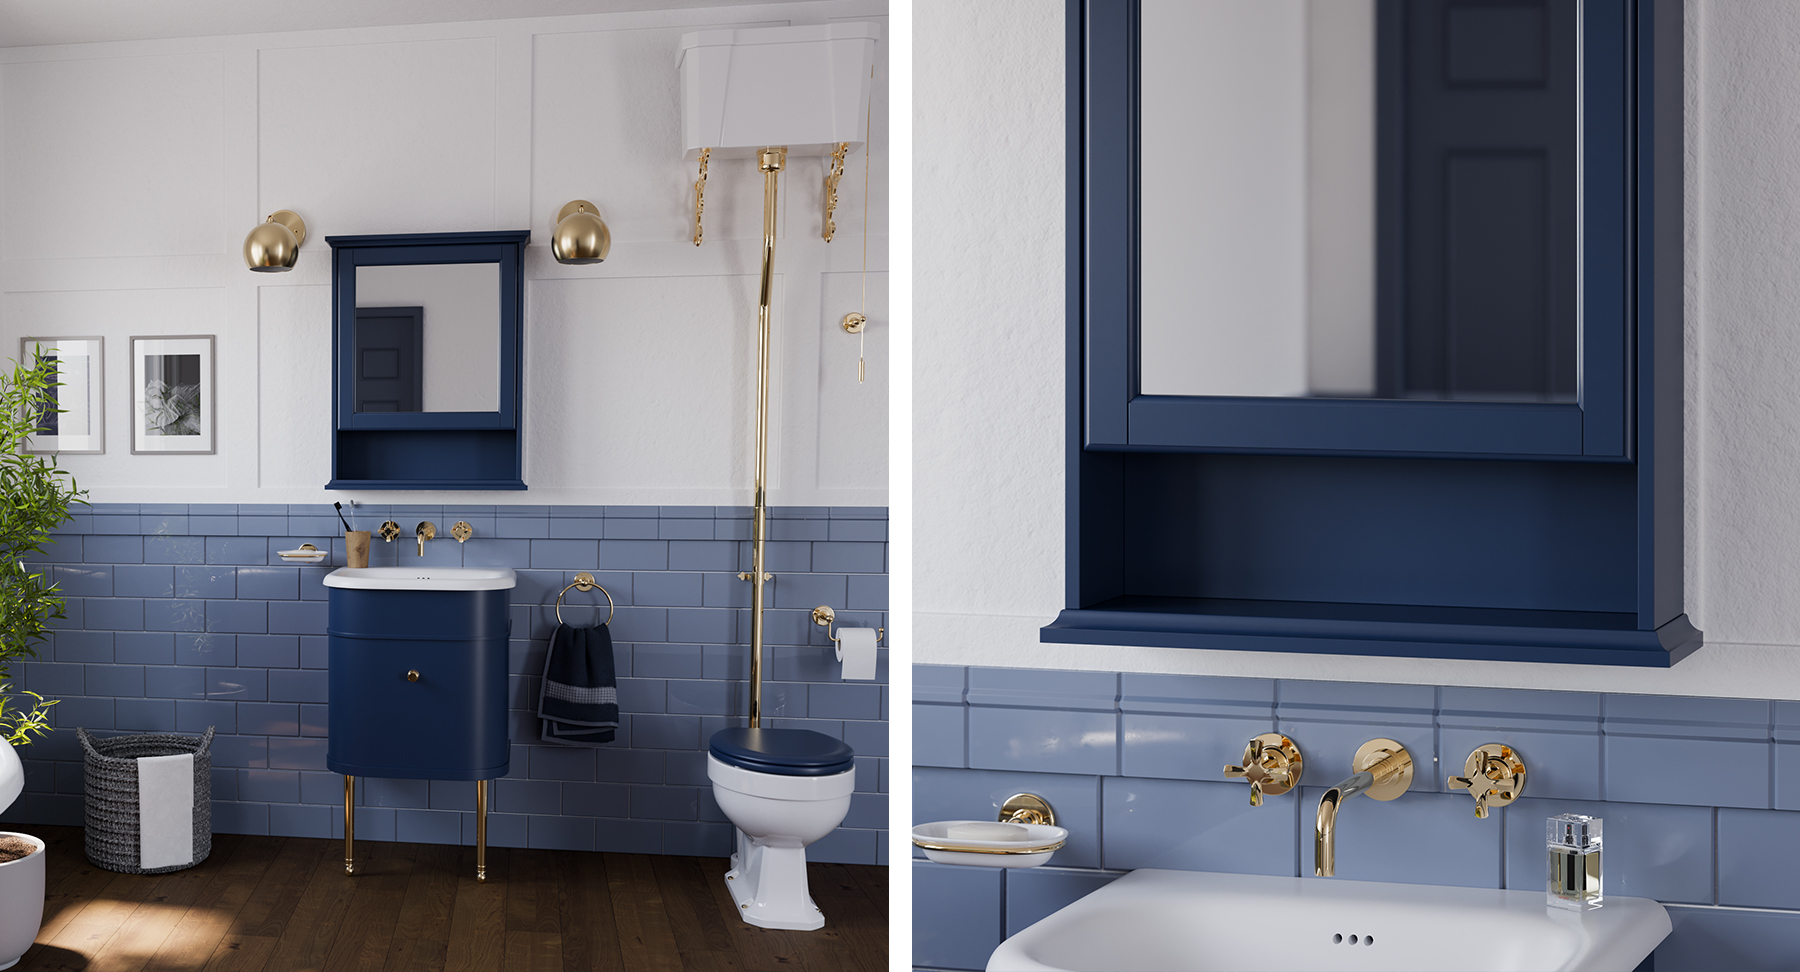 Traditional Bathroom Design | Capture a classic bathroom style with traditional blue vanity units from our Chalfont collection